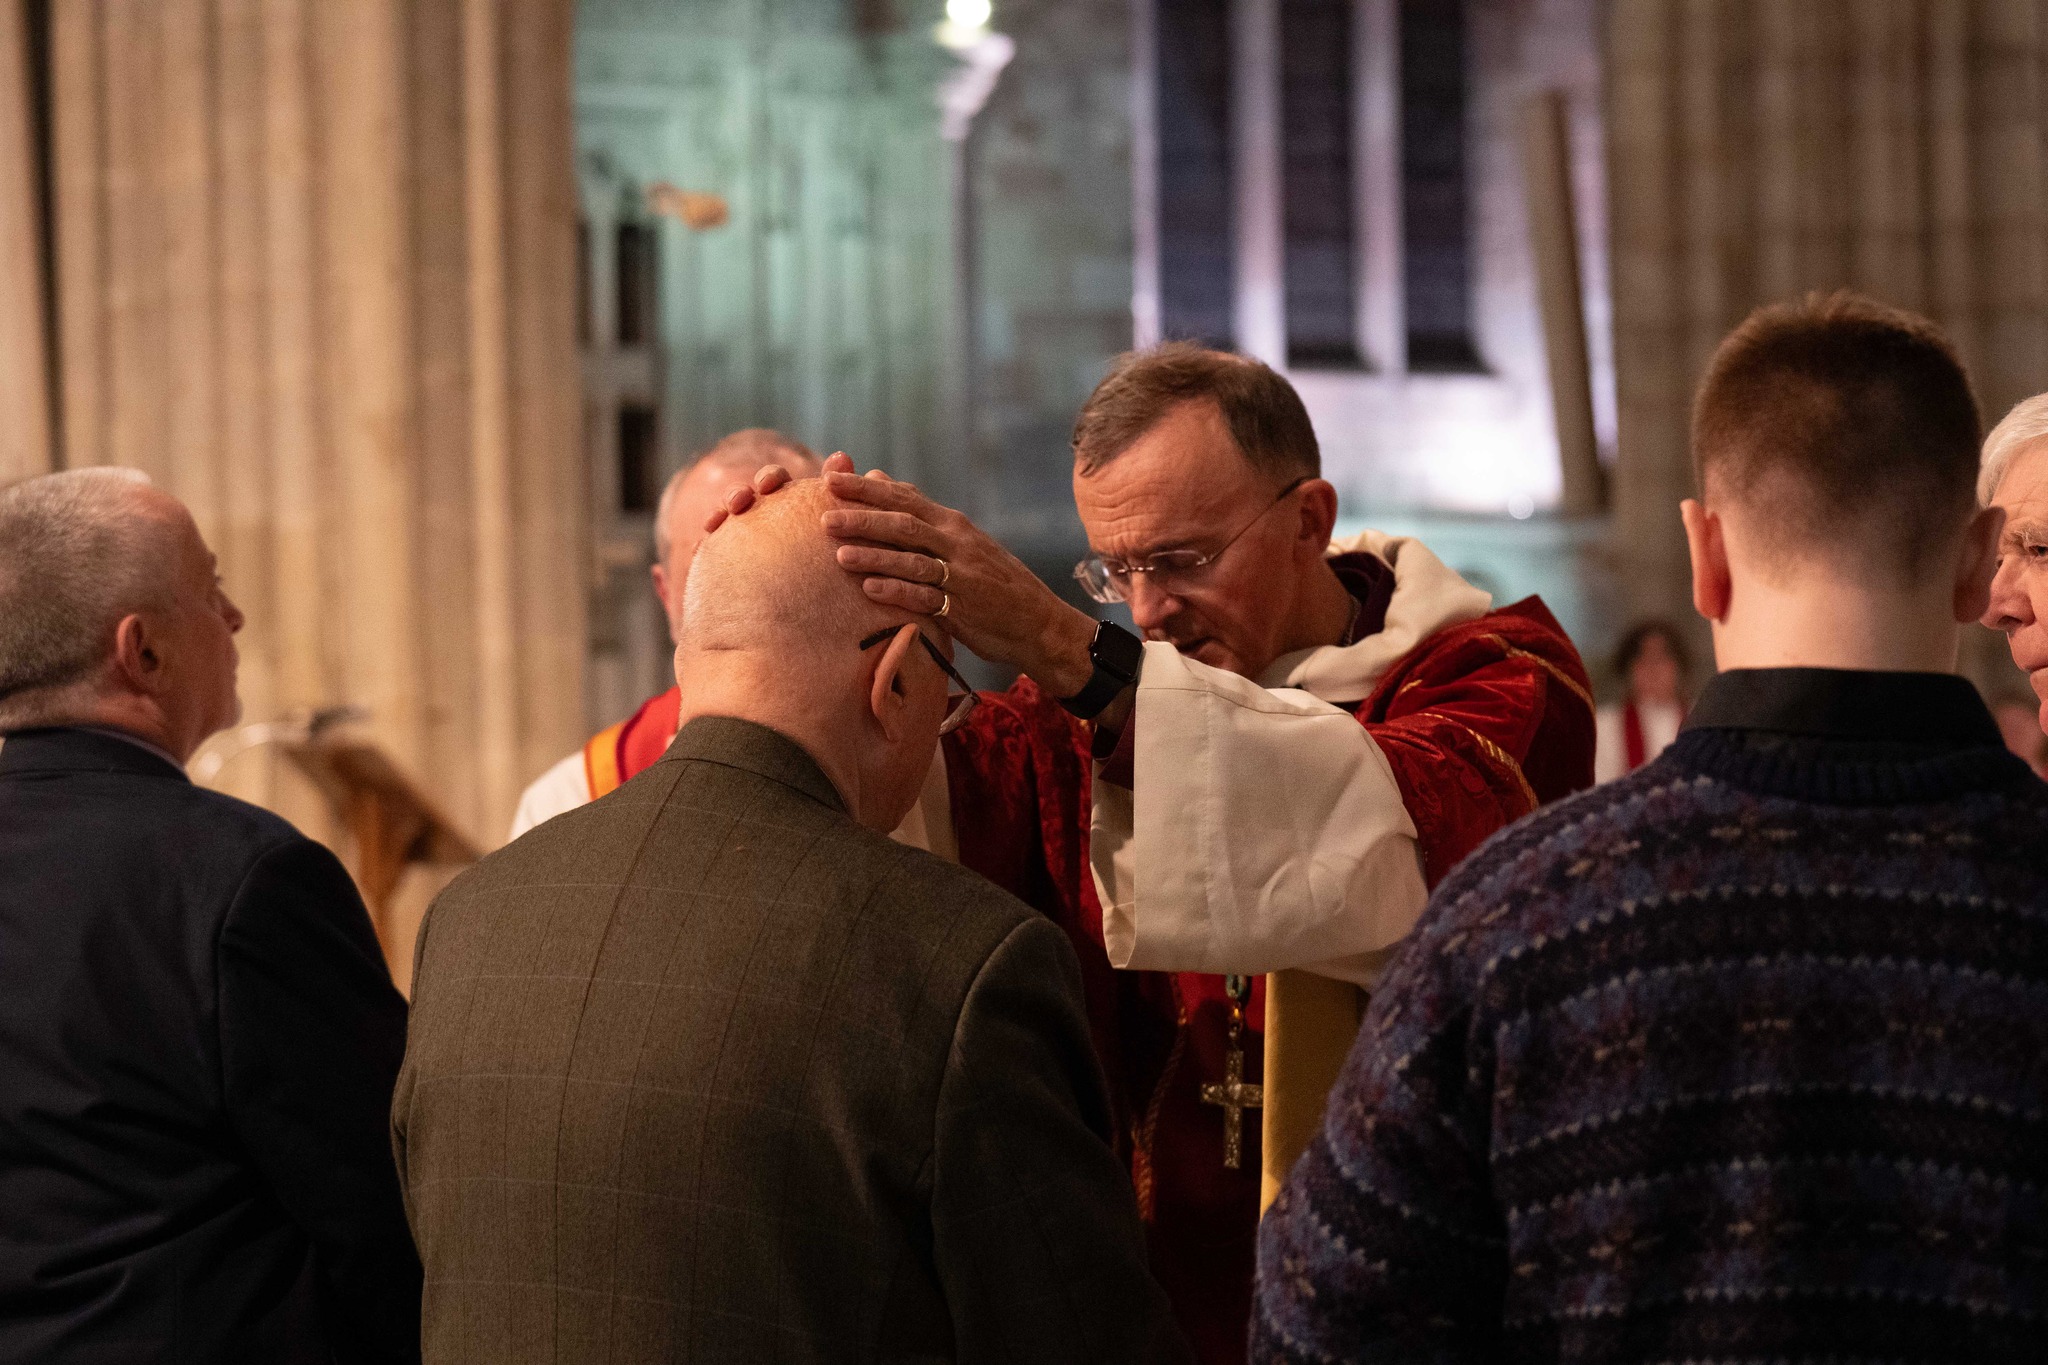 Male candidate being confirmed by Bishop John